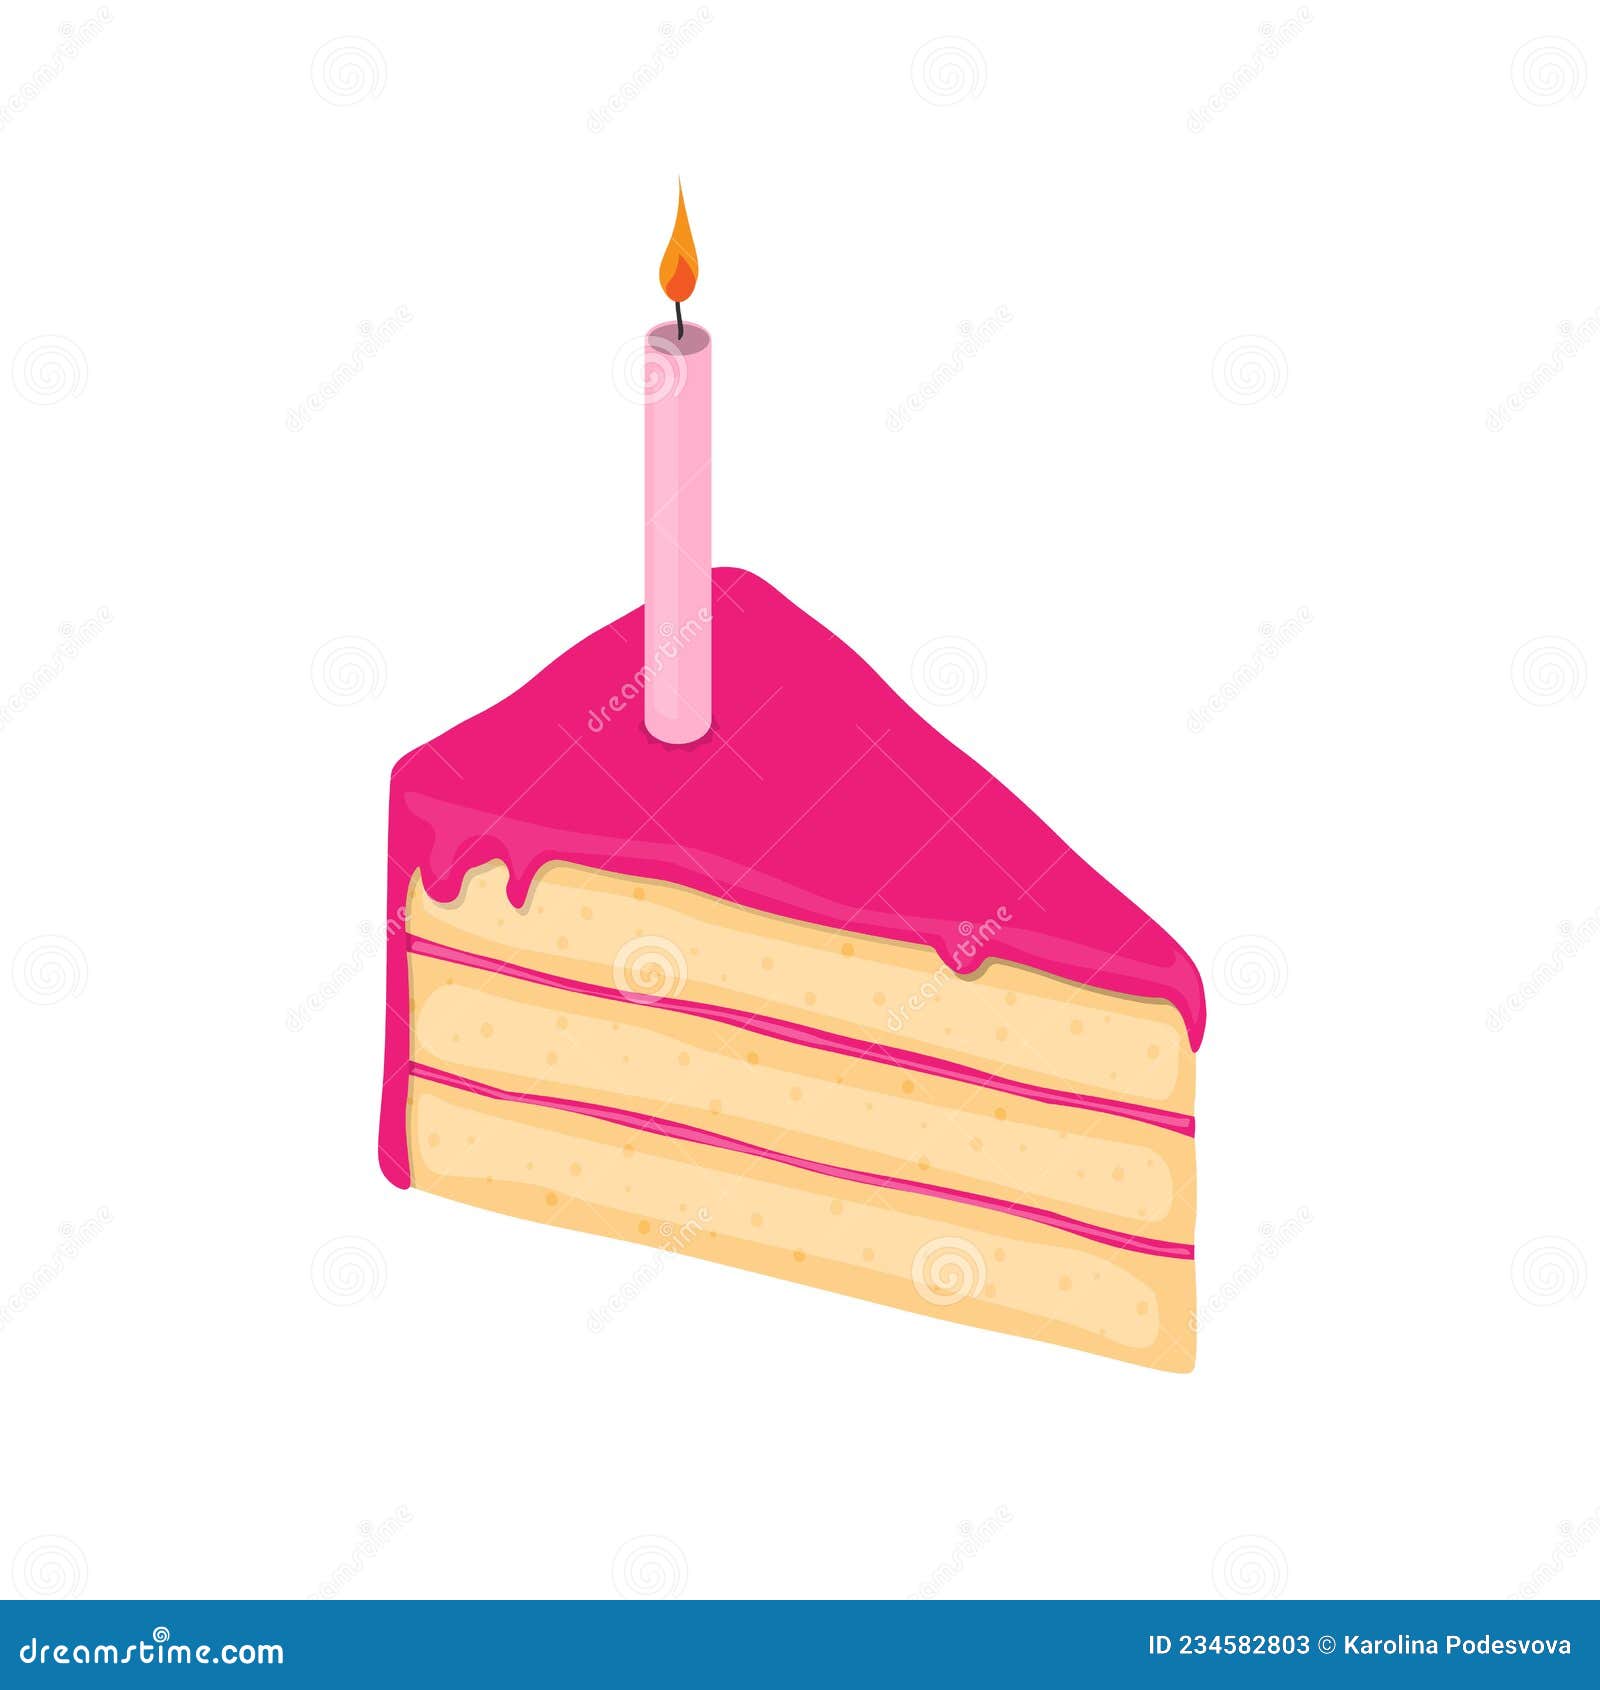 Piece of Cake for First Birthday with One Candle and Pink Icing. for Girls  Stock Vector - Illustration of cake, pink: 234582803